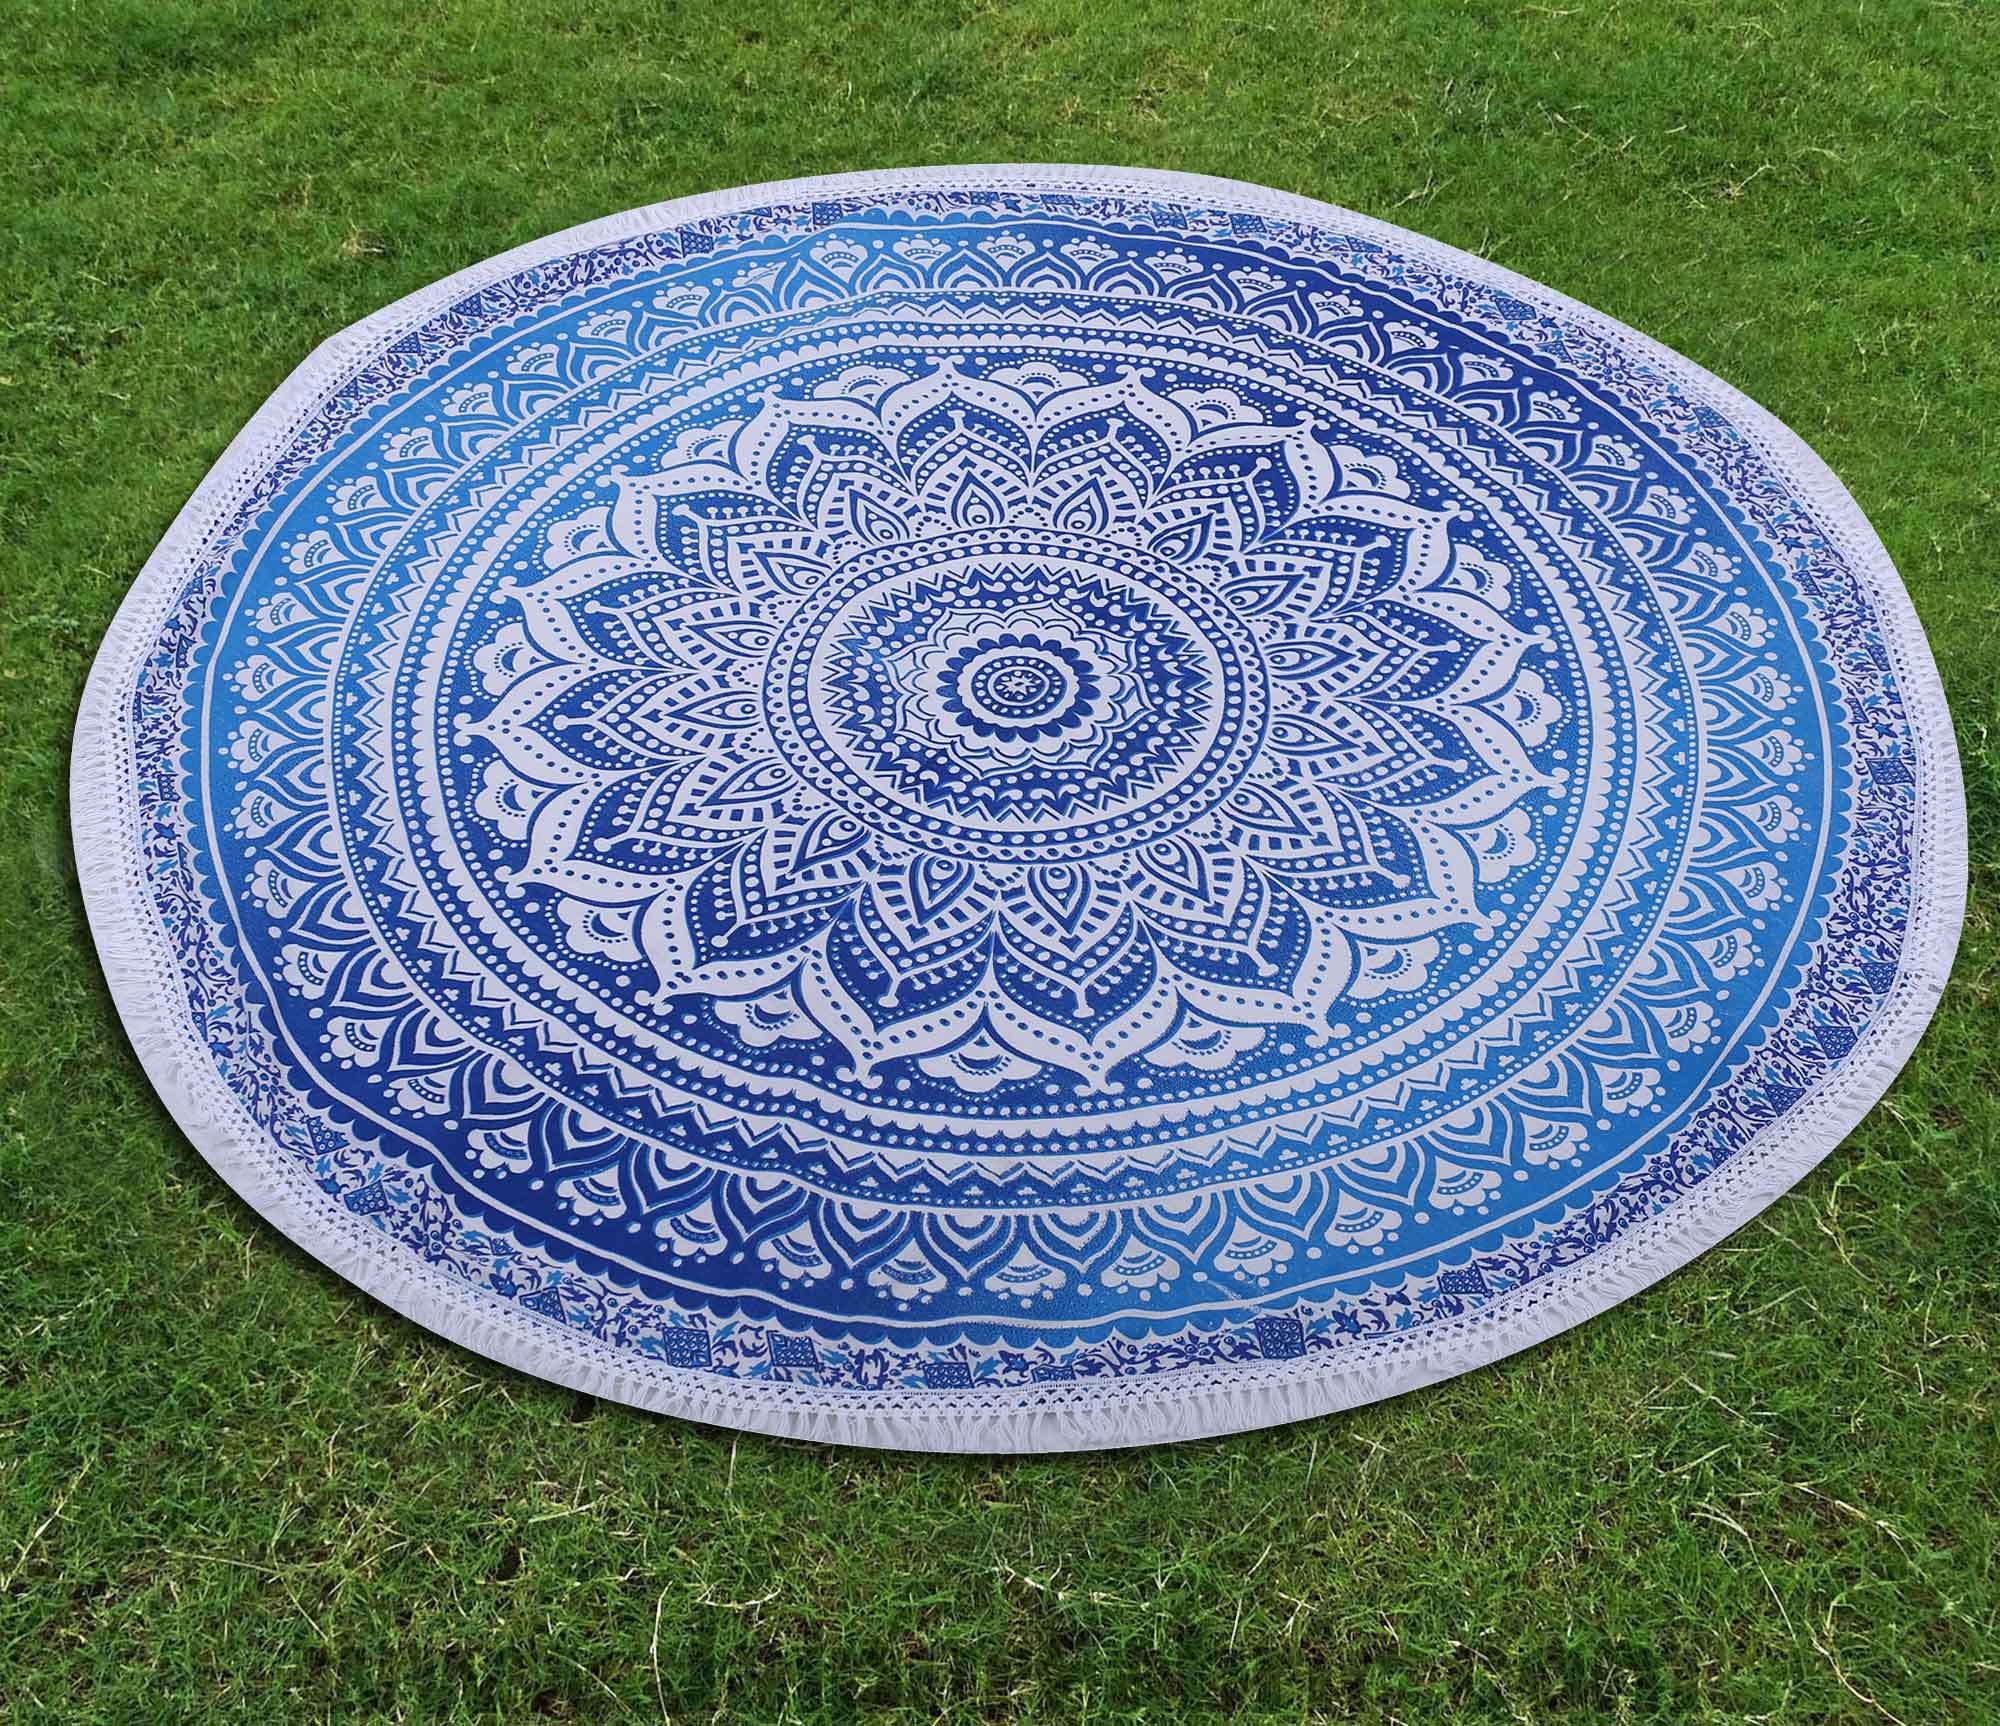 Pink Ombre Mandala Printed Wall Hanging Round Roundies Beach Throw Cotton Yoga Mat Table Cloths Table Cover Picnic Mat Tapestry Picnic Blanket Mat 72